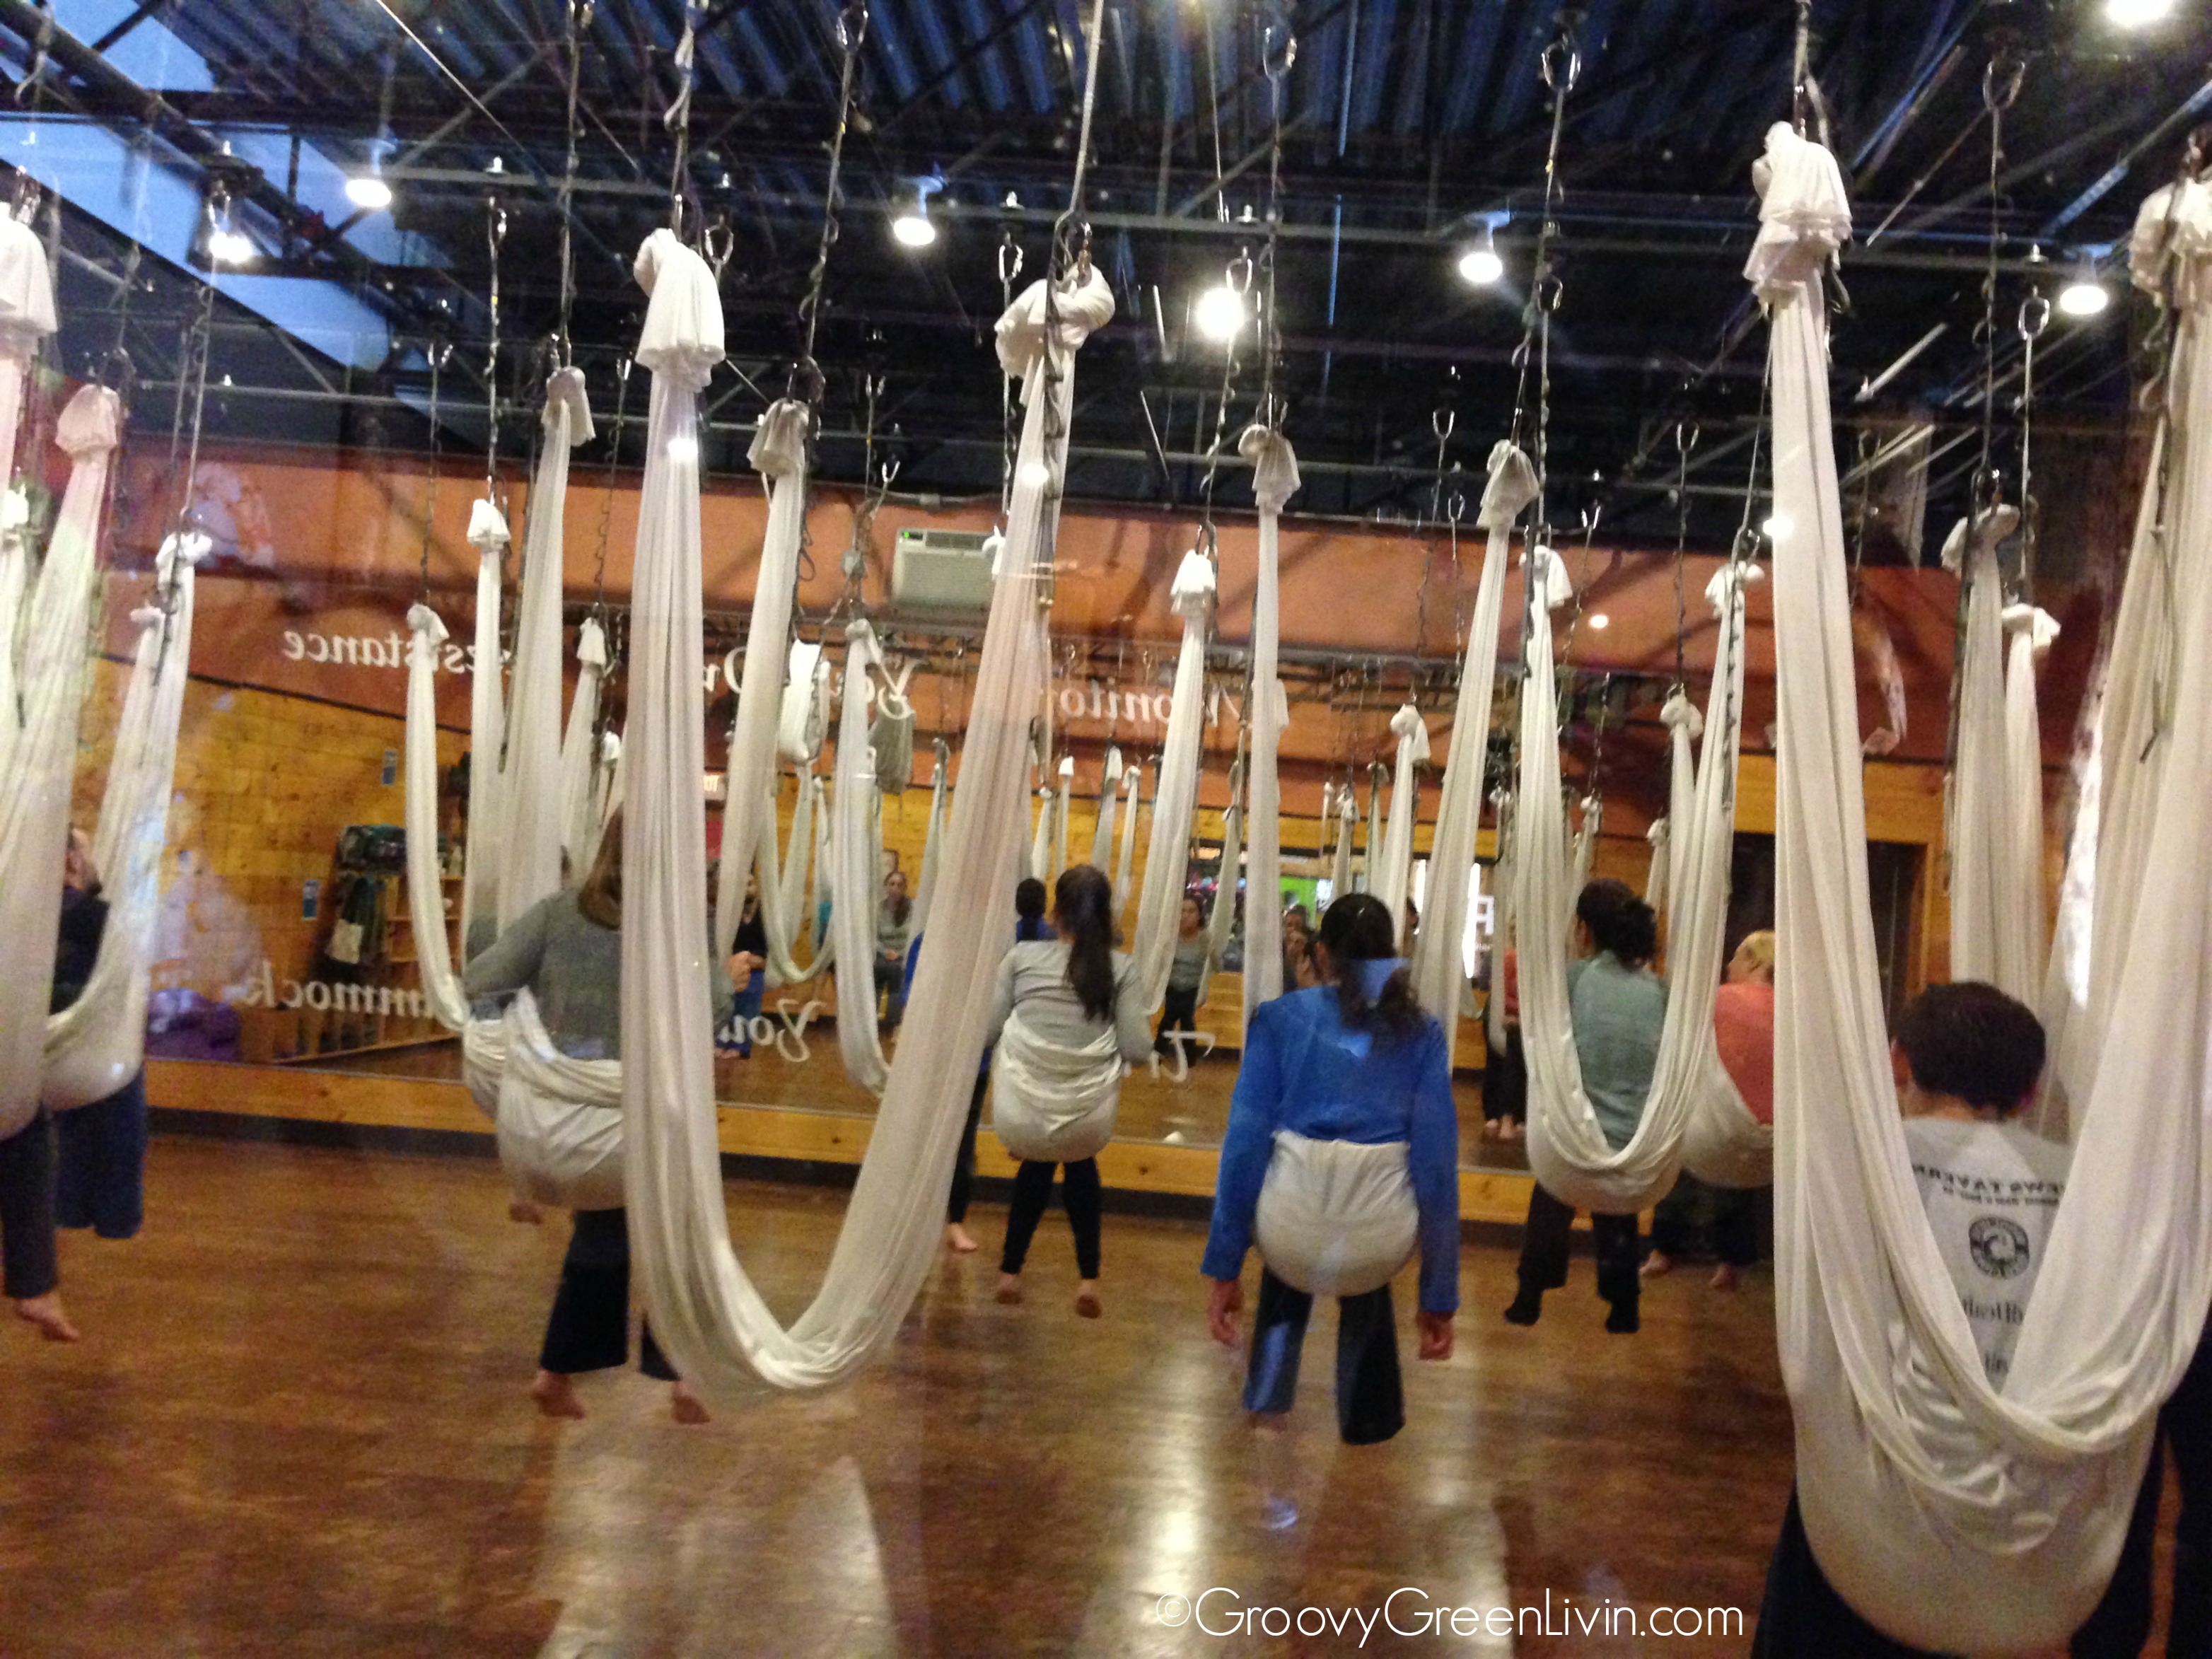 The Antigravity Aerial Yoga Trend Taking A Closer Look